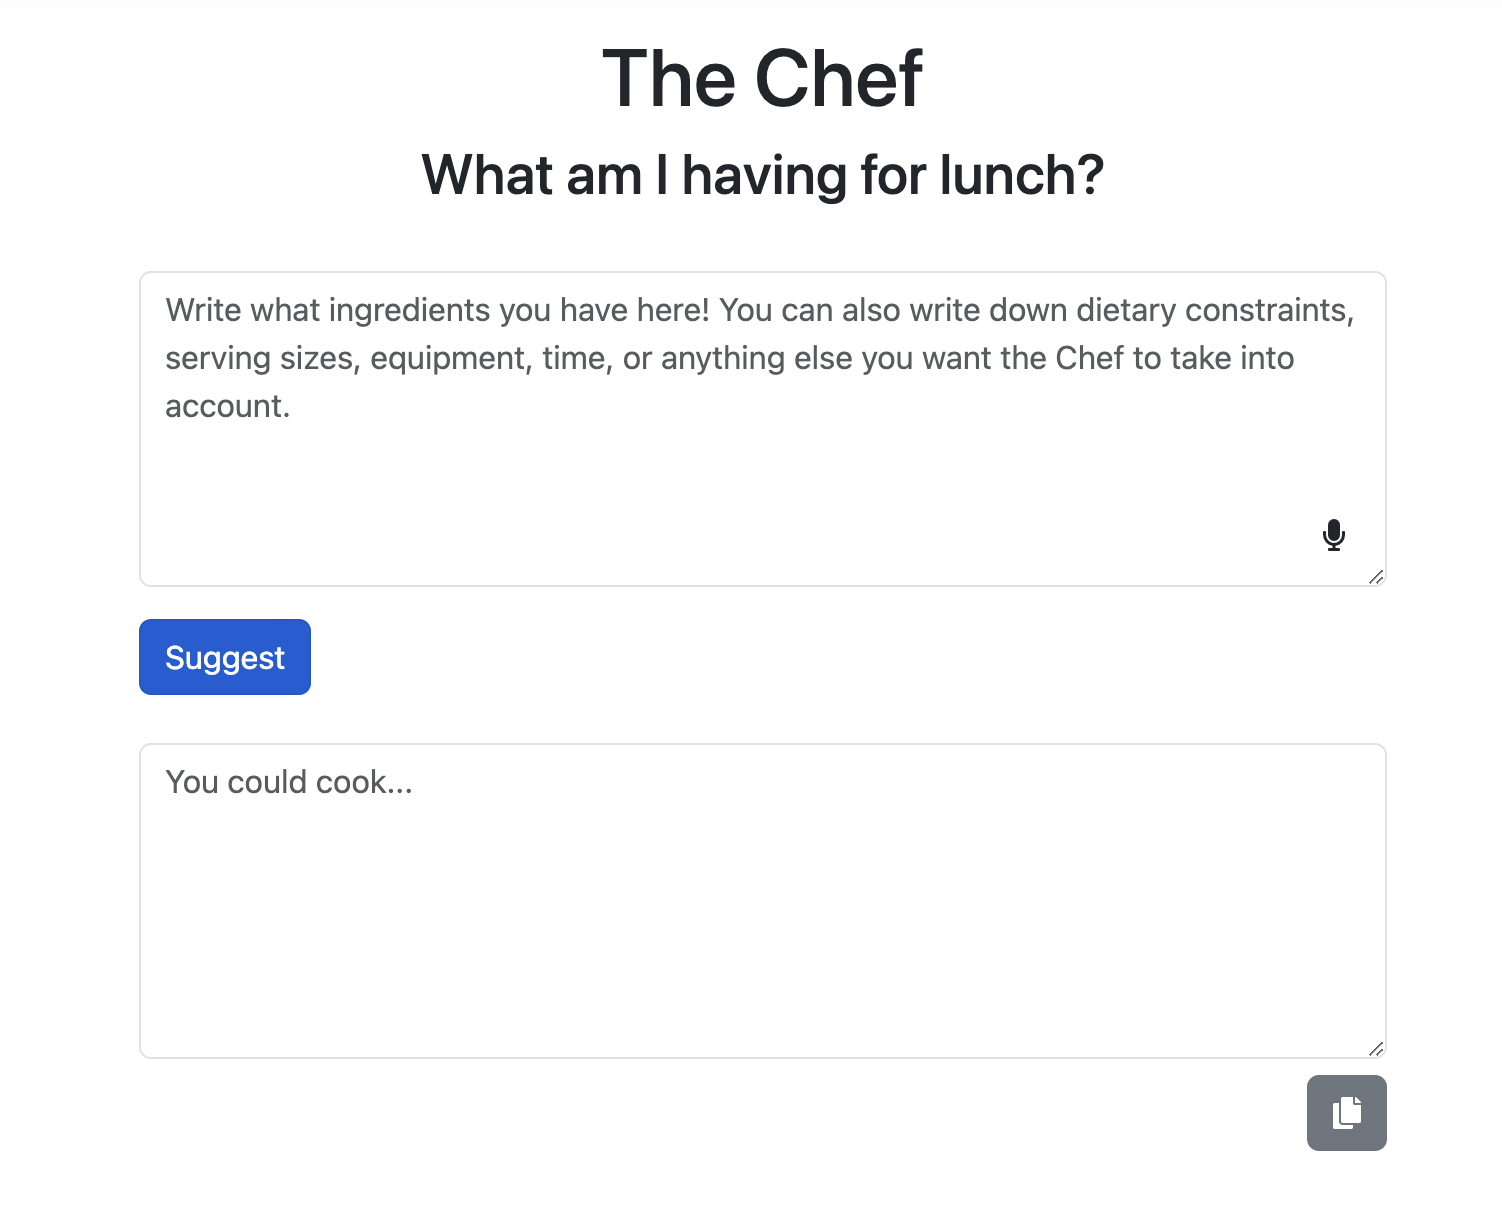 The Chef, What am I having for lunch? Write what ingredients you have here! You can also write down dietary constraints, serving sizes, equipment, time, or anything else you want the chef to take into account.